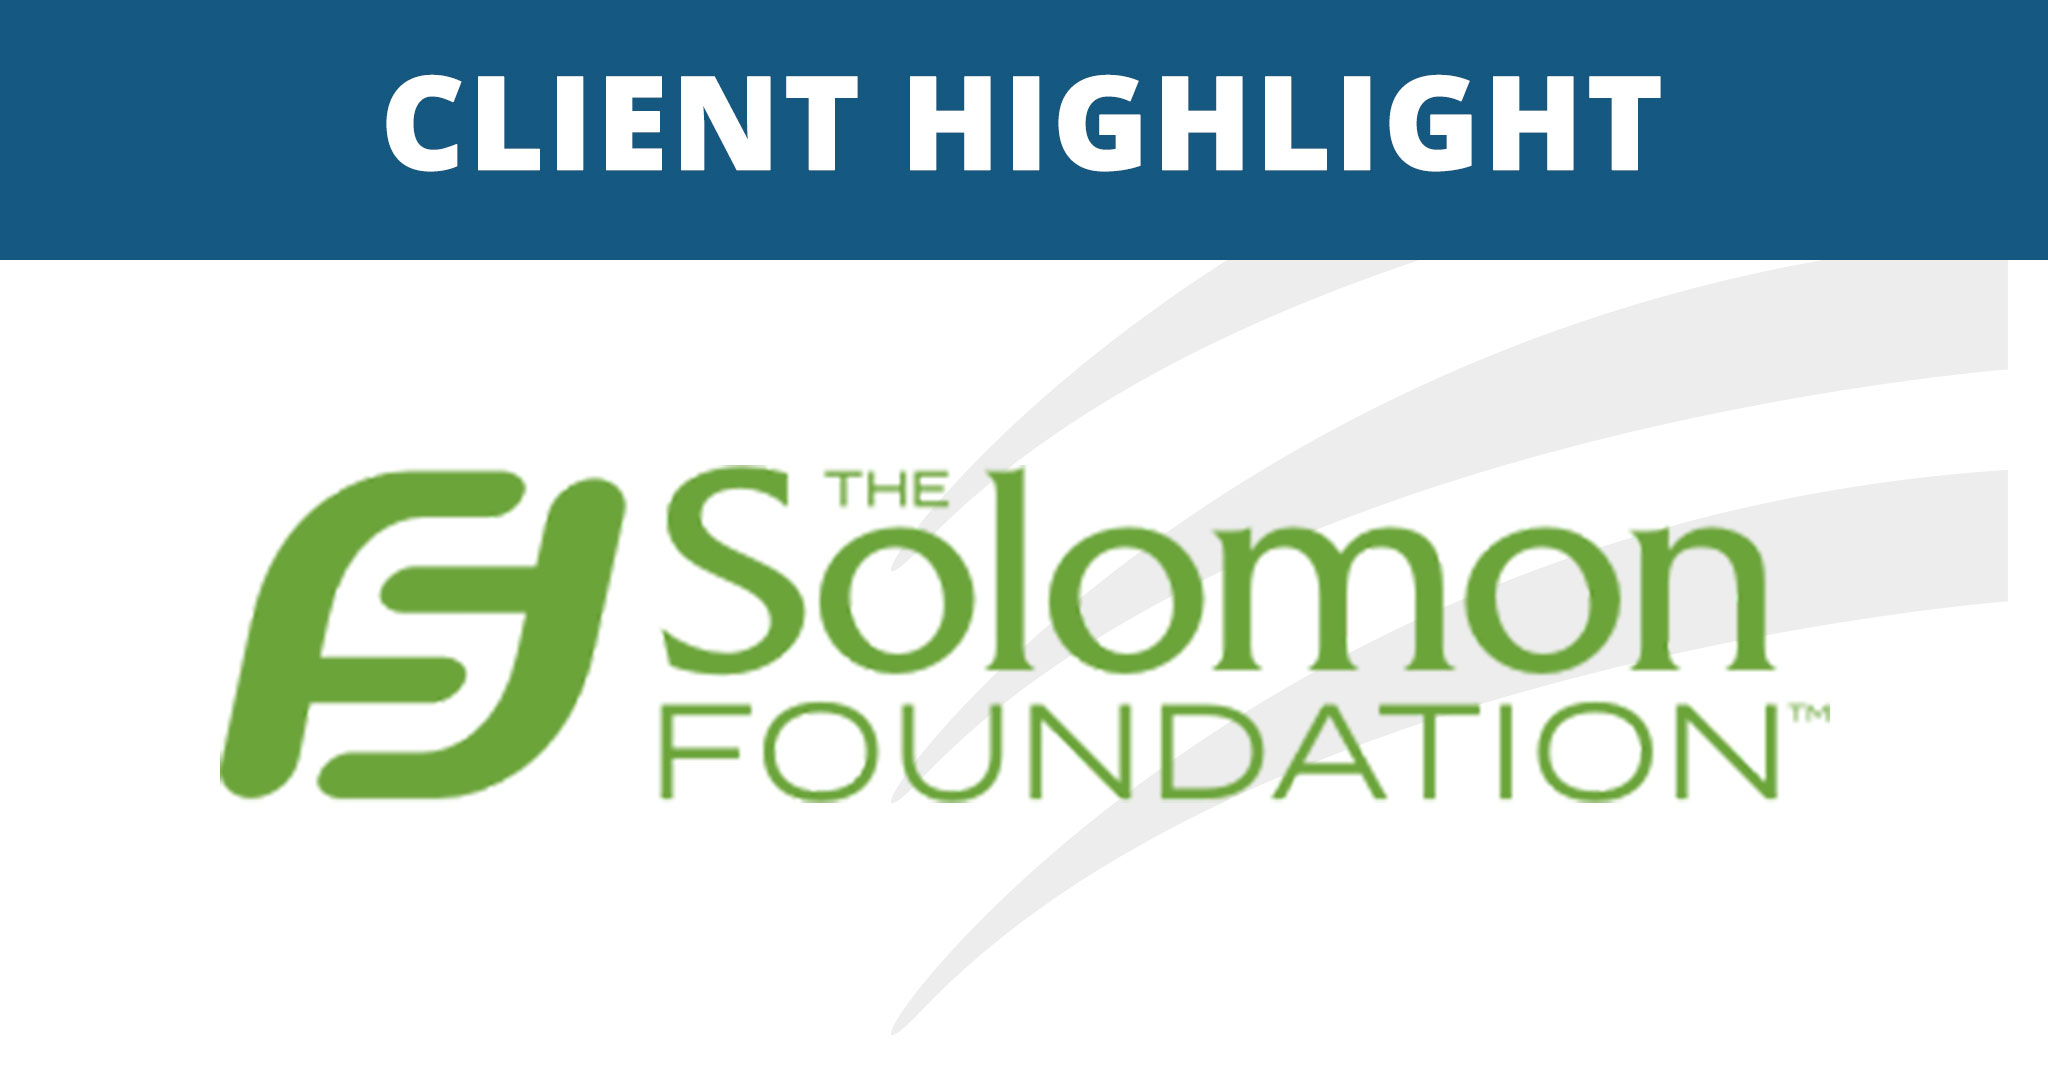 Client Highlight: The Solomon Foundation